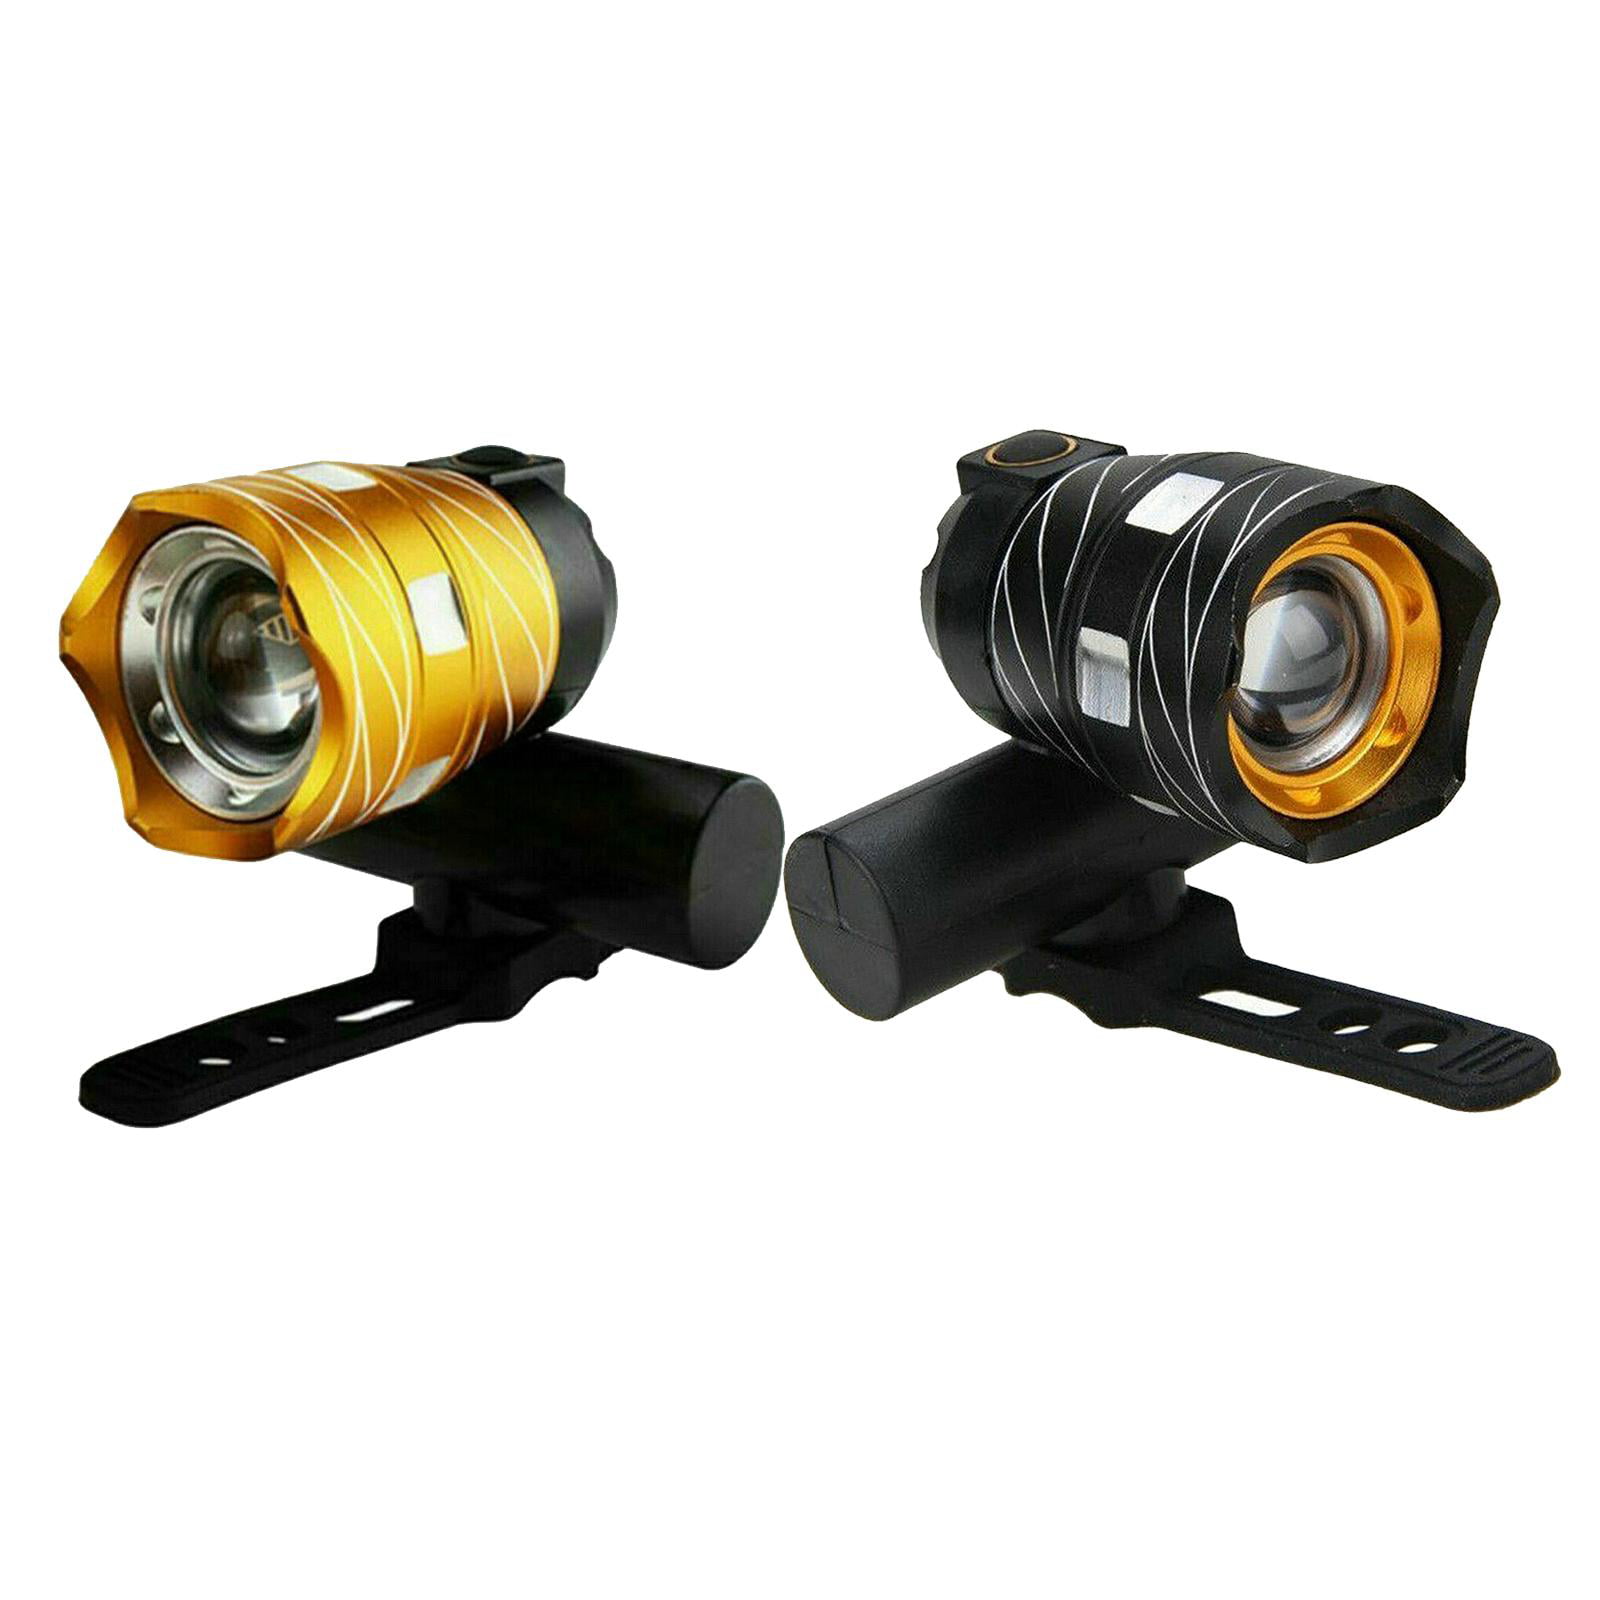 2X 15000LM T6 LED Bicycle Light Fish Bike Front Rear Headlight USB Rechargeable